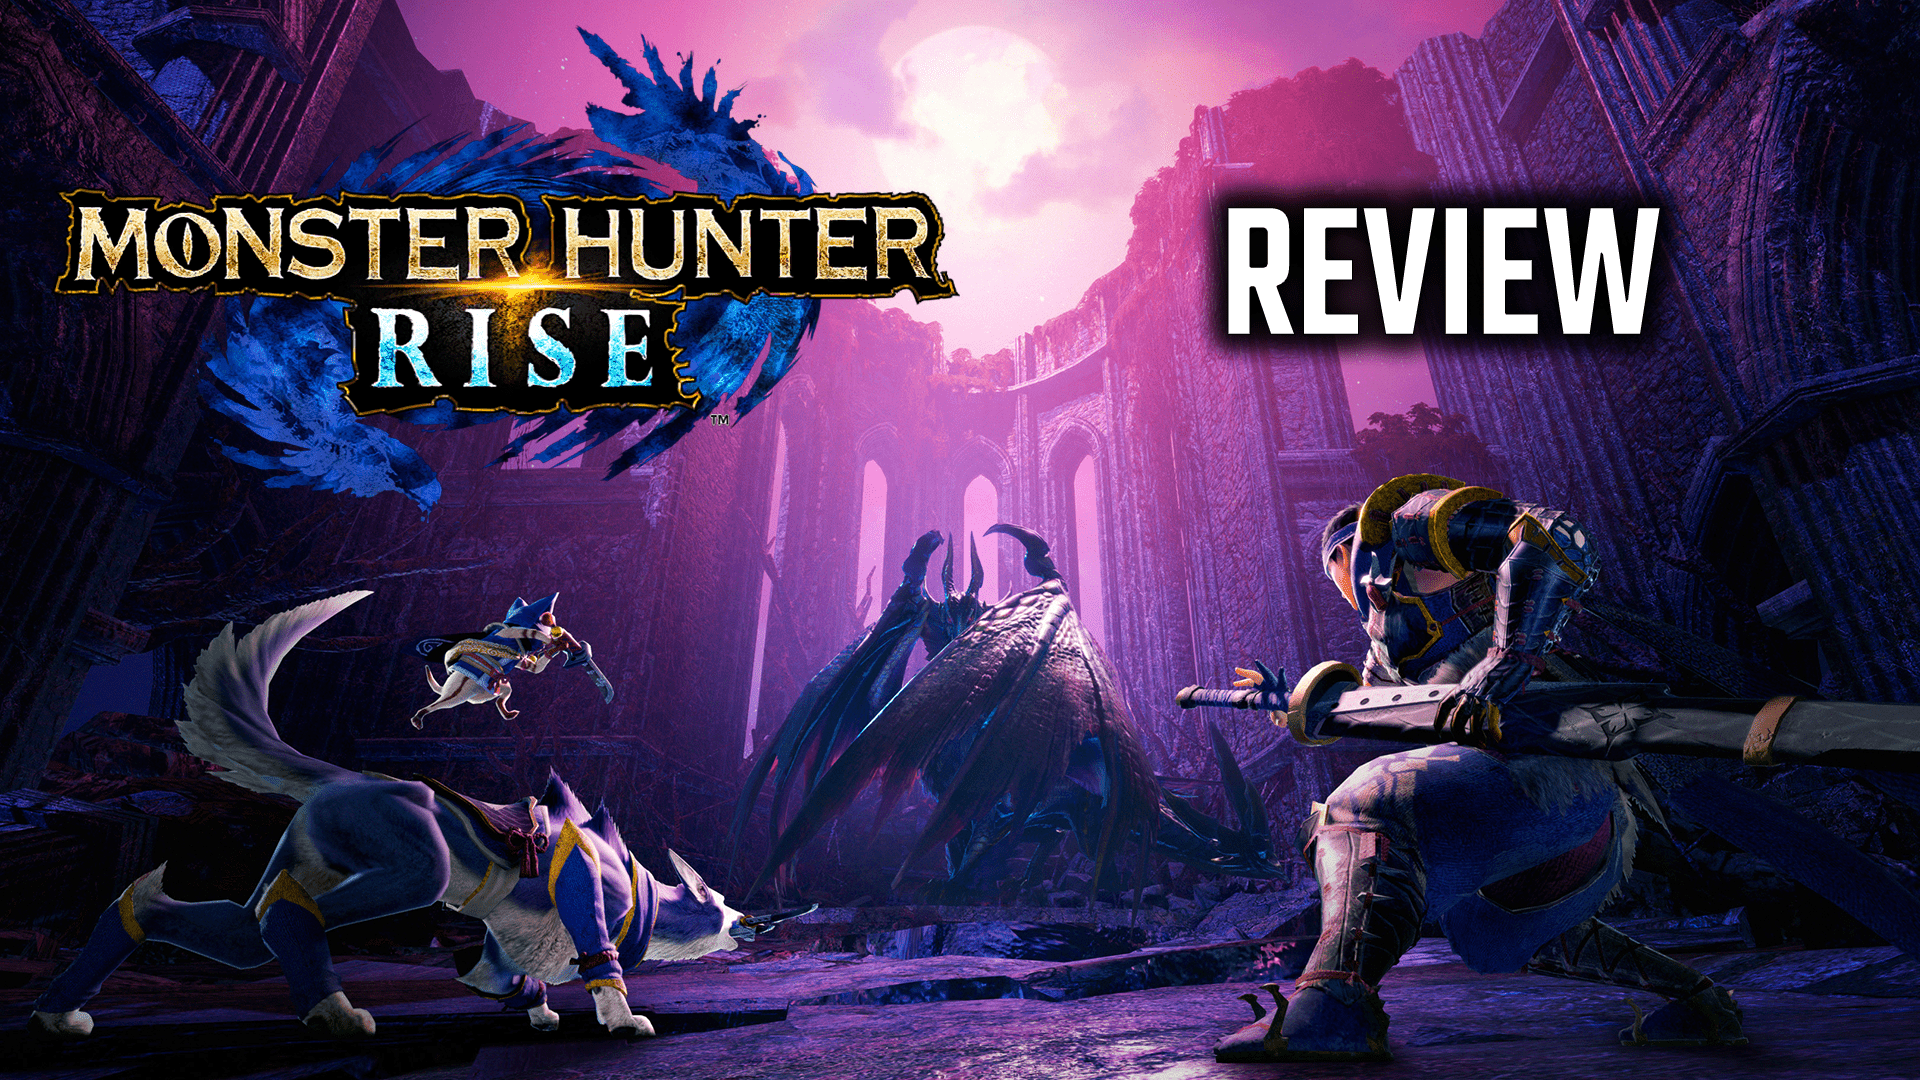 Monster Hunter Rise Review A BORING GRINDFEST? The Beta Network